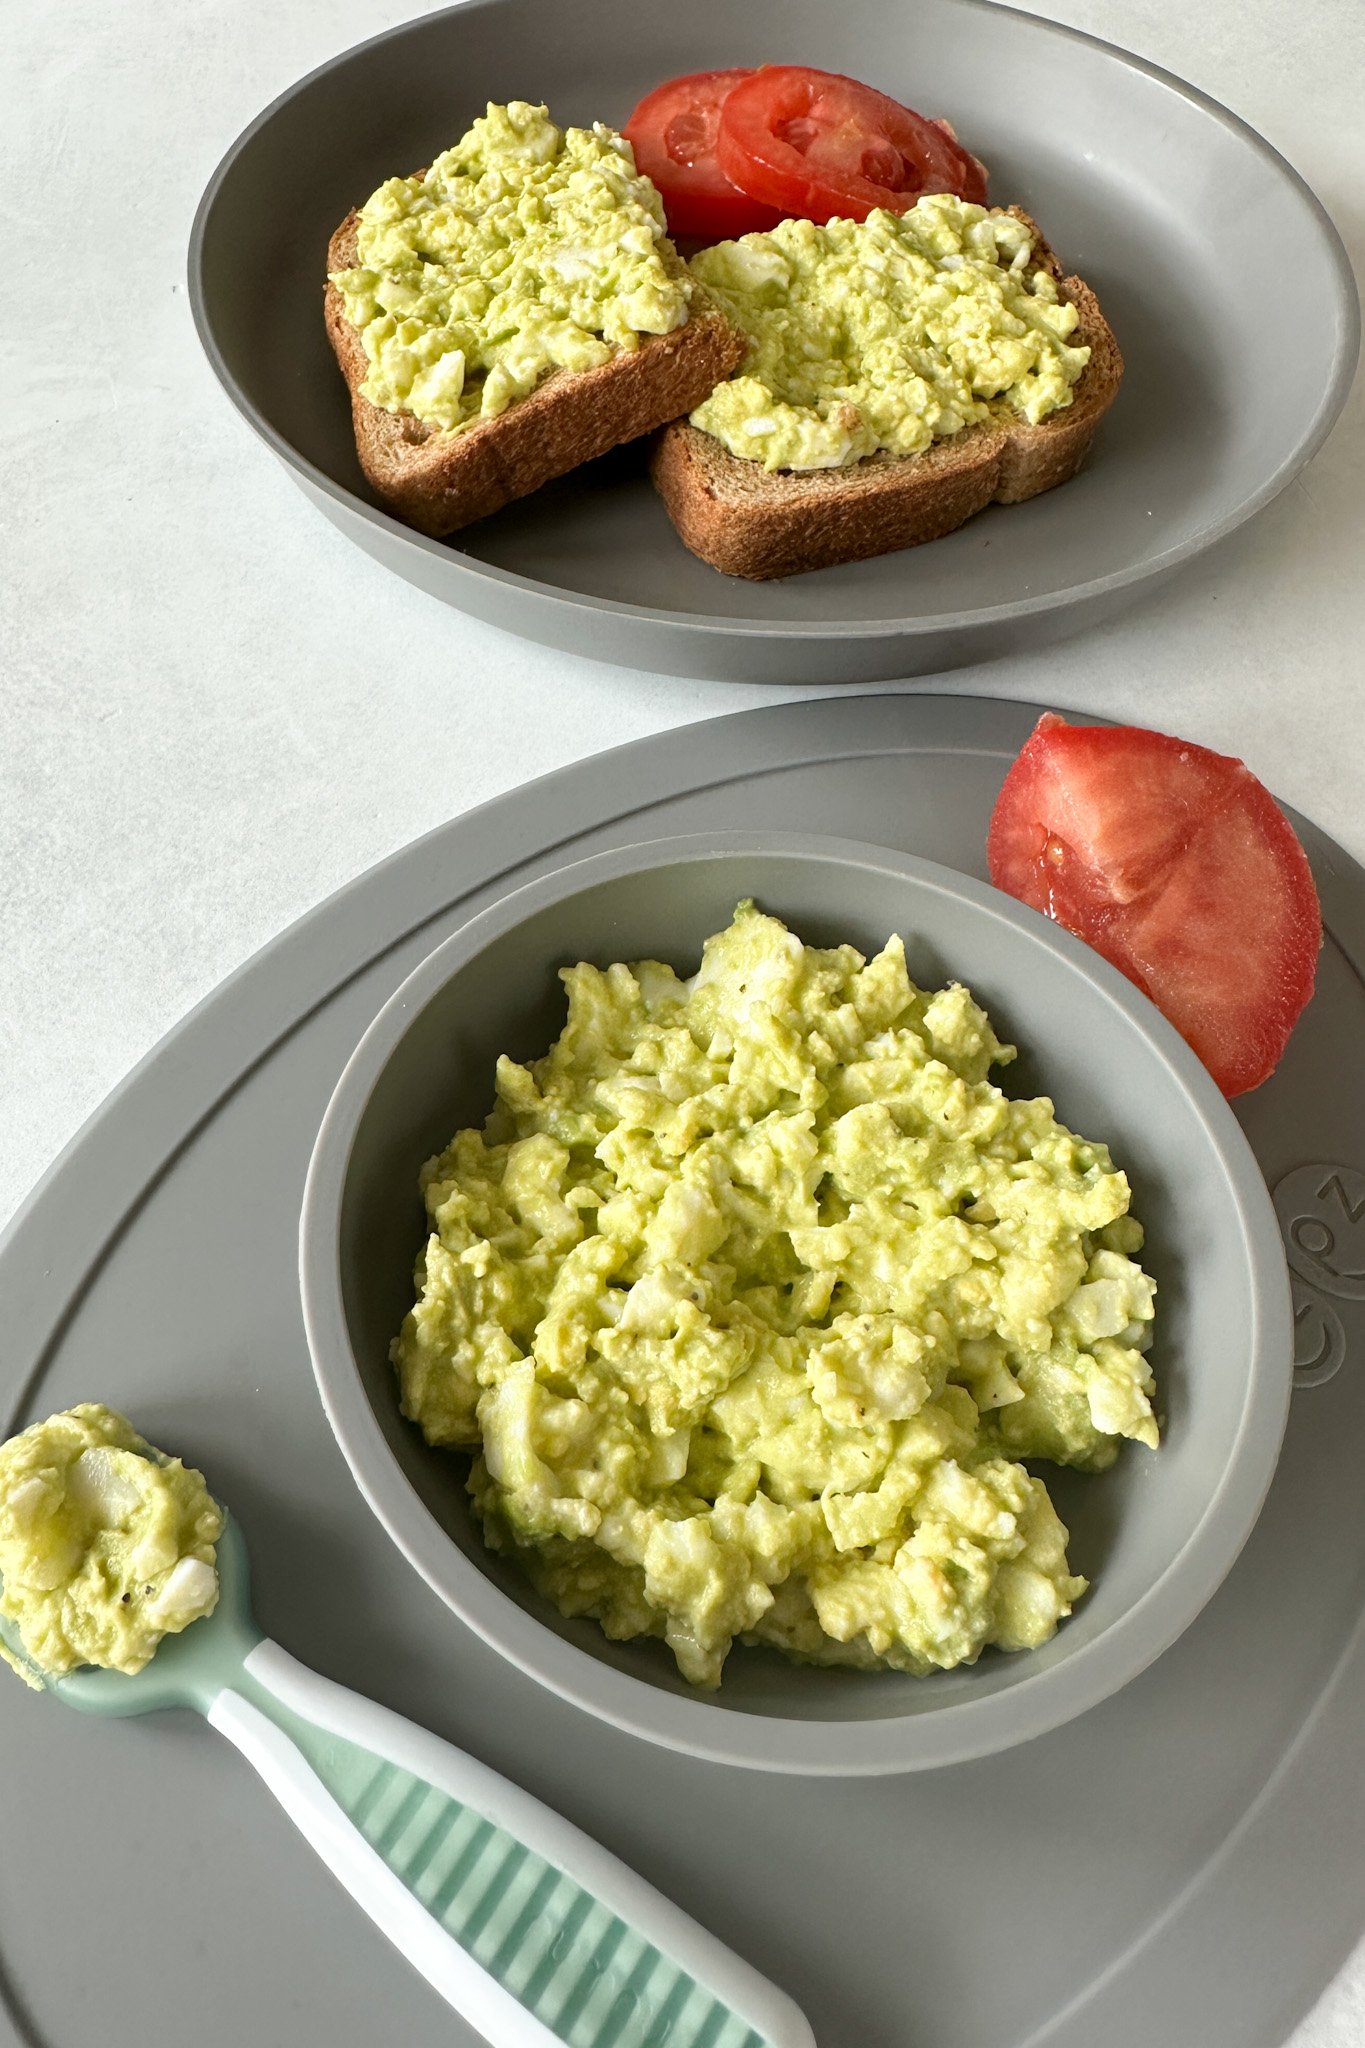 Avocado egg salad served with tomatoes.